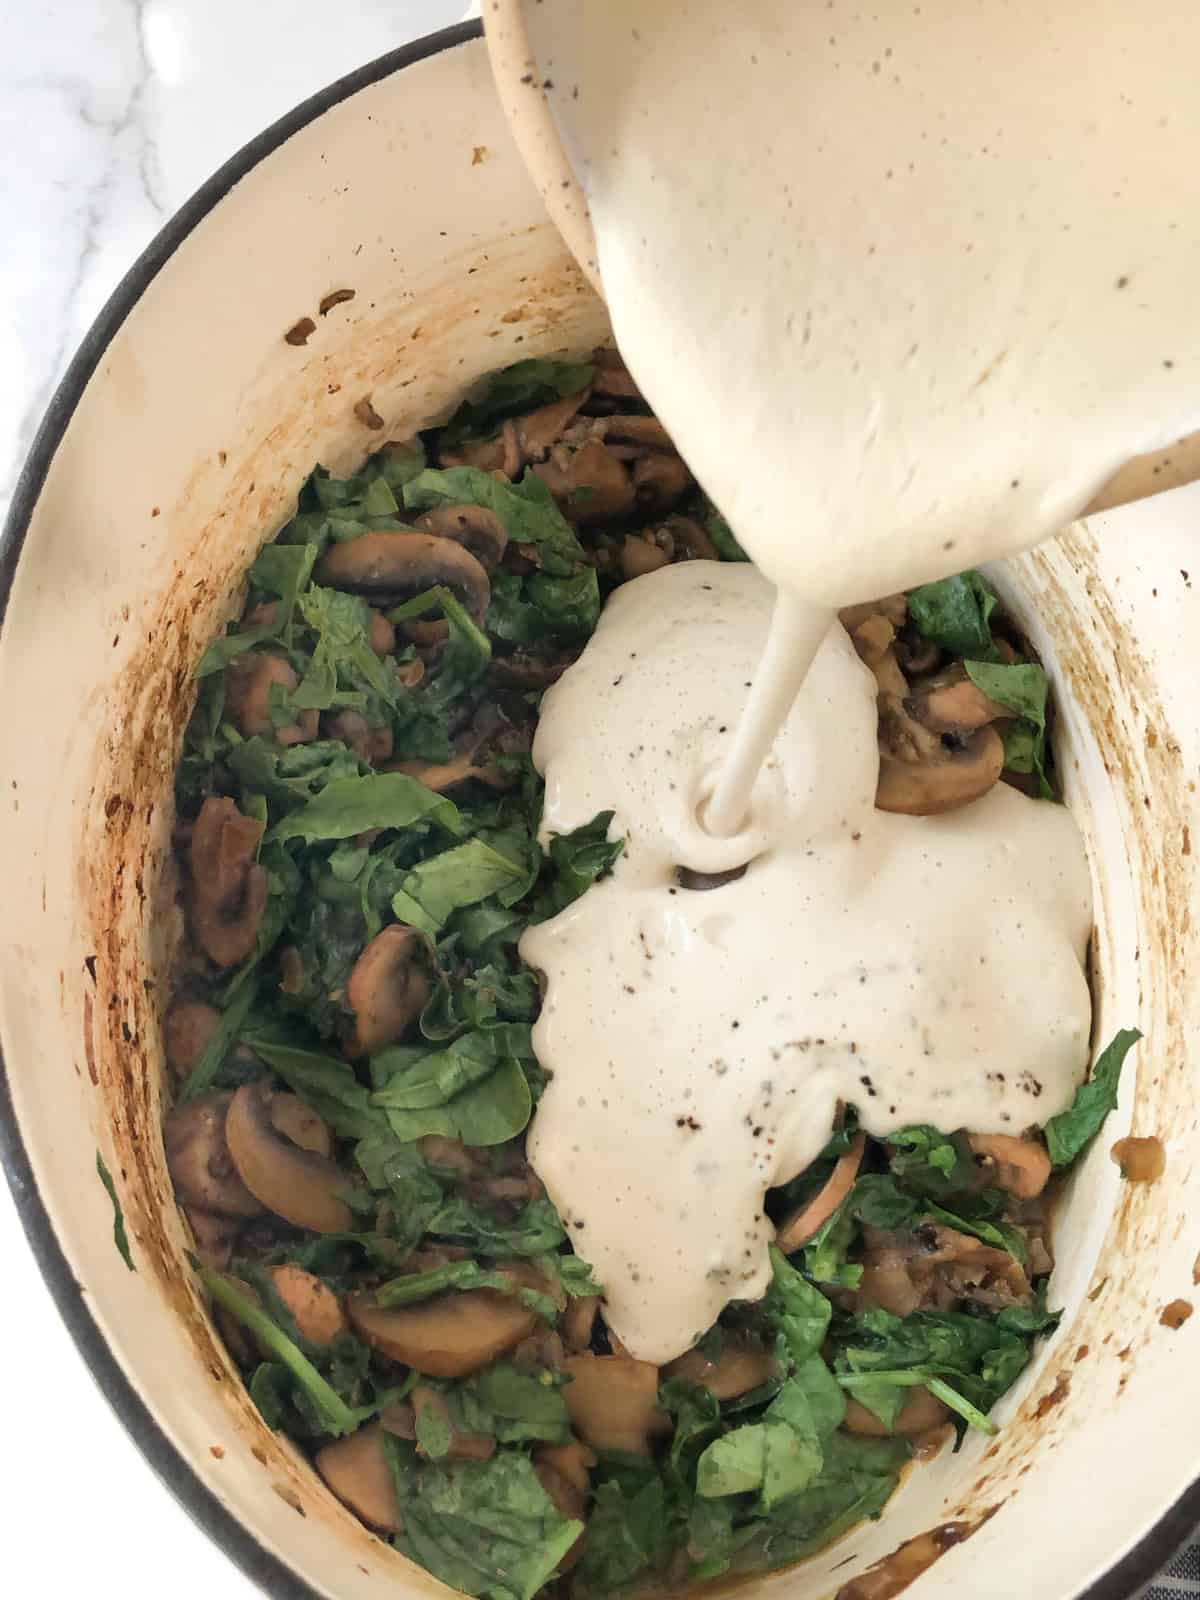 Cashew cream being poured into a Dutch oven filled with sauteed mushrooms and spinach.